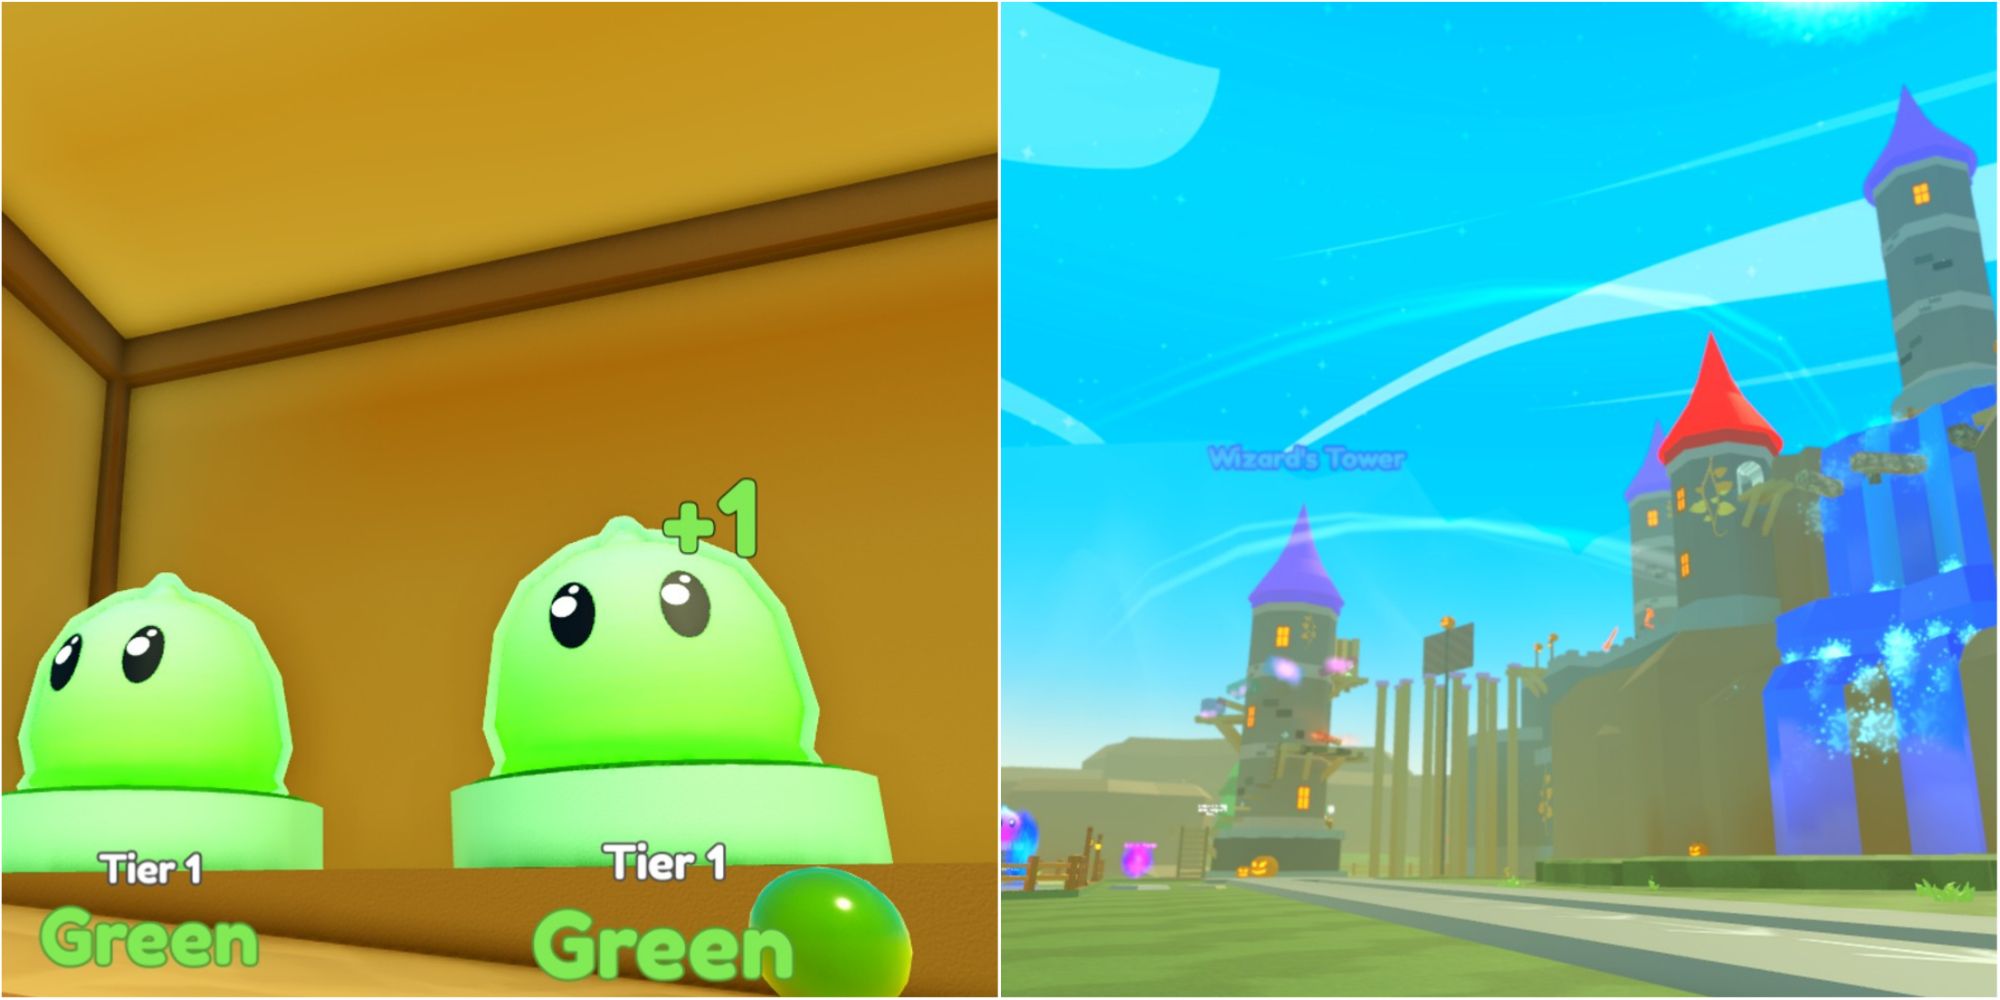 Slime Tower Tycoon Codes